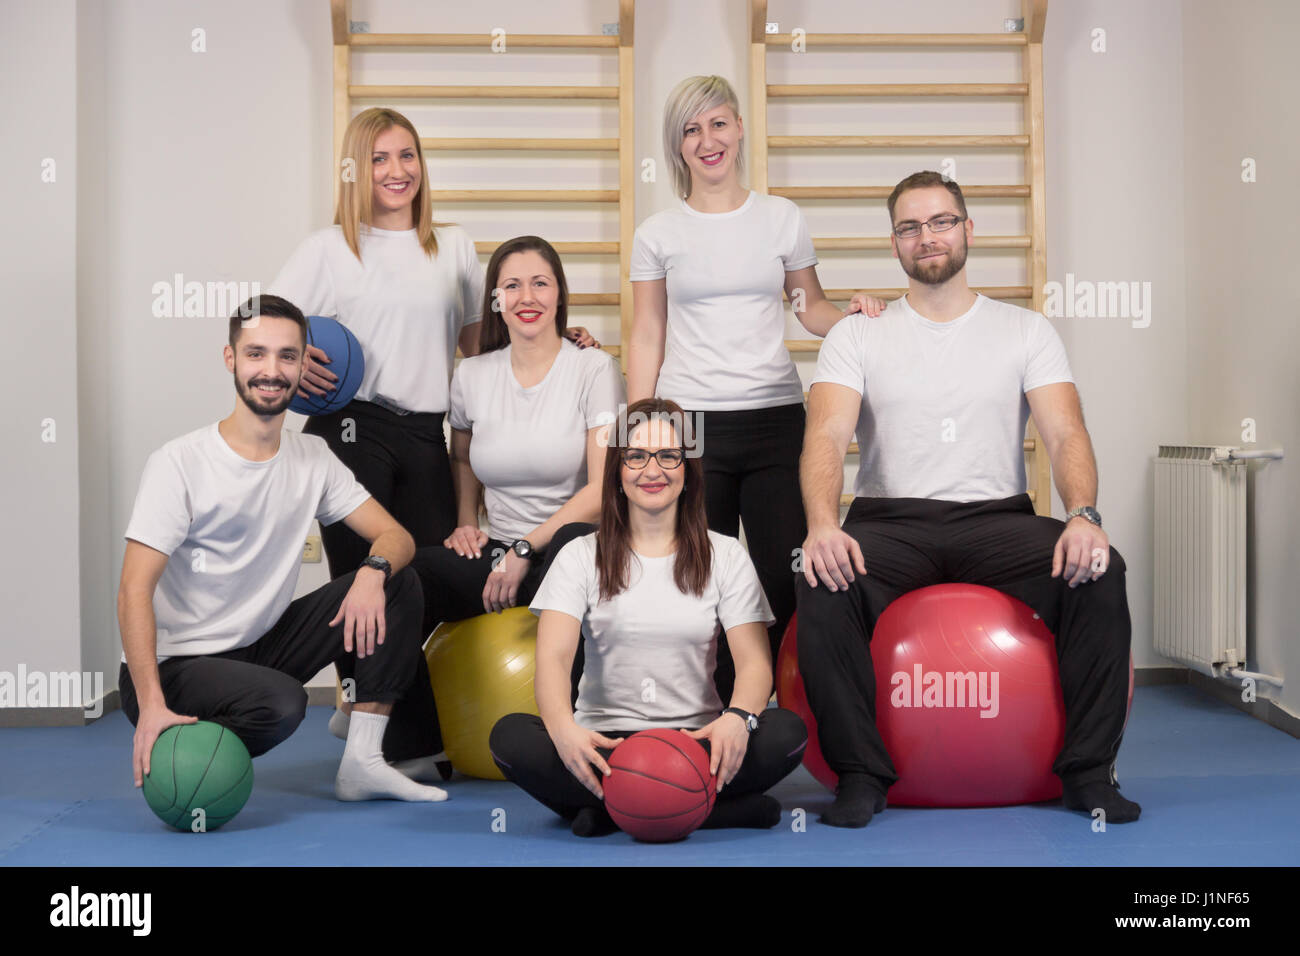 large group people, Physiotherapists chiropractors, indoors portrait, sitting standing, exercise balls Stock Photo